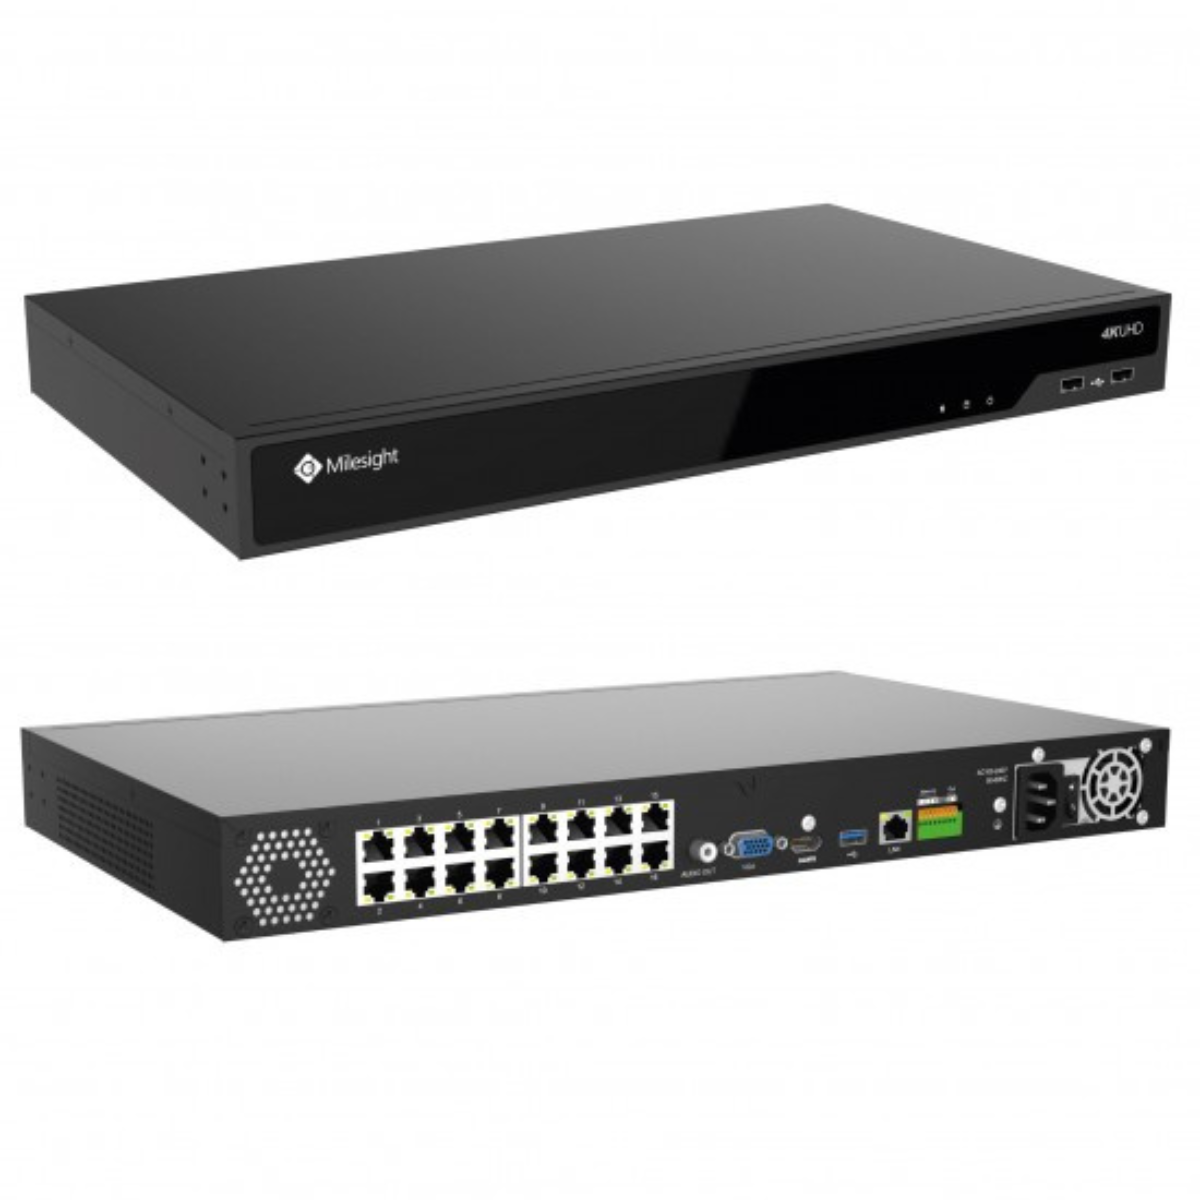 "High-Performance 16-Channel PRO NVR with 20TB Storage Capacity and RJ45 Connectivity"